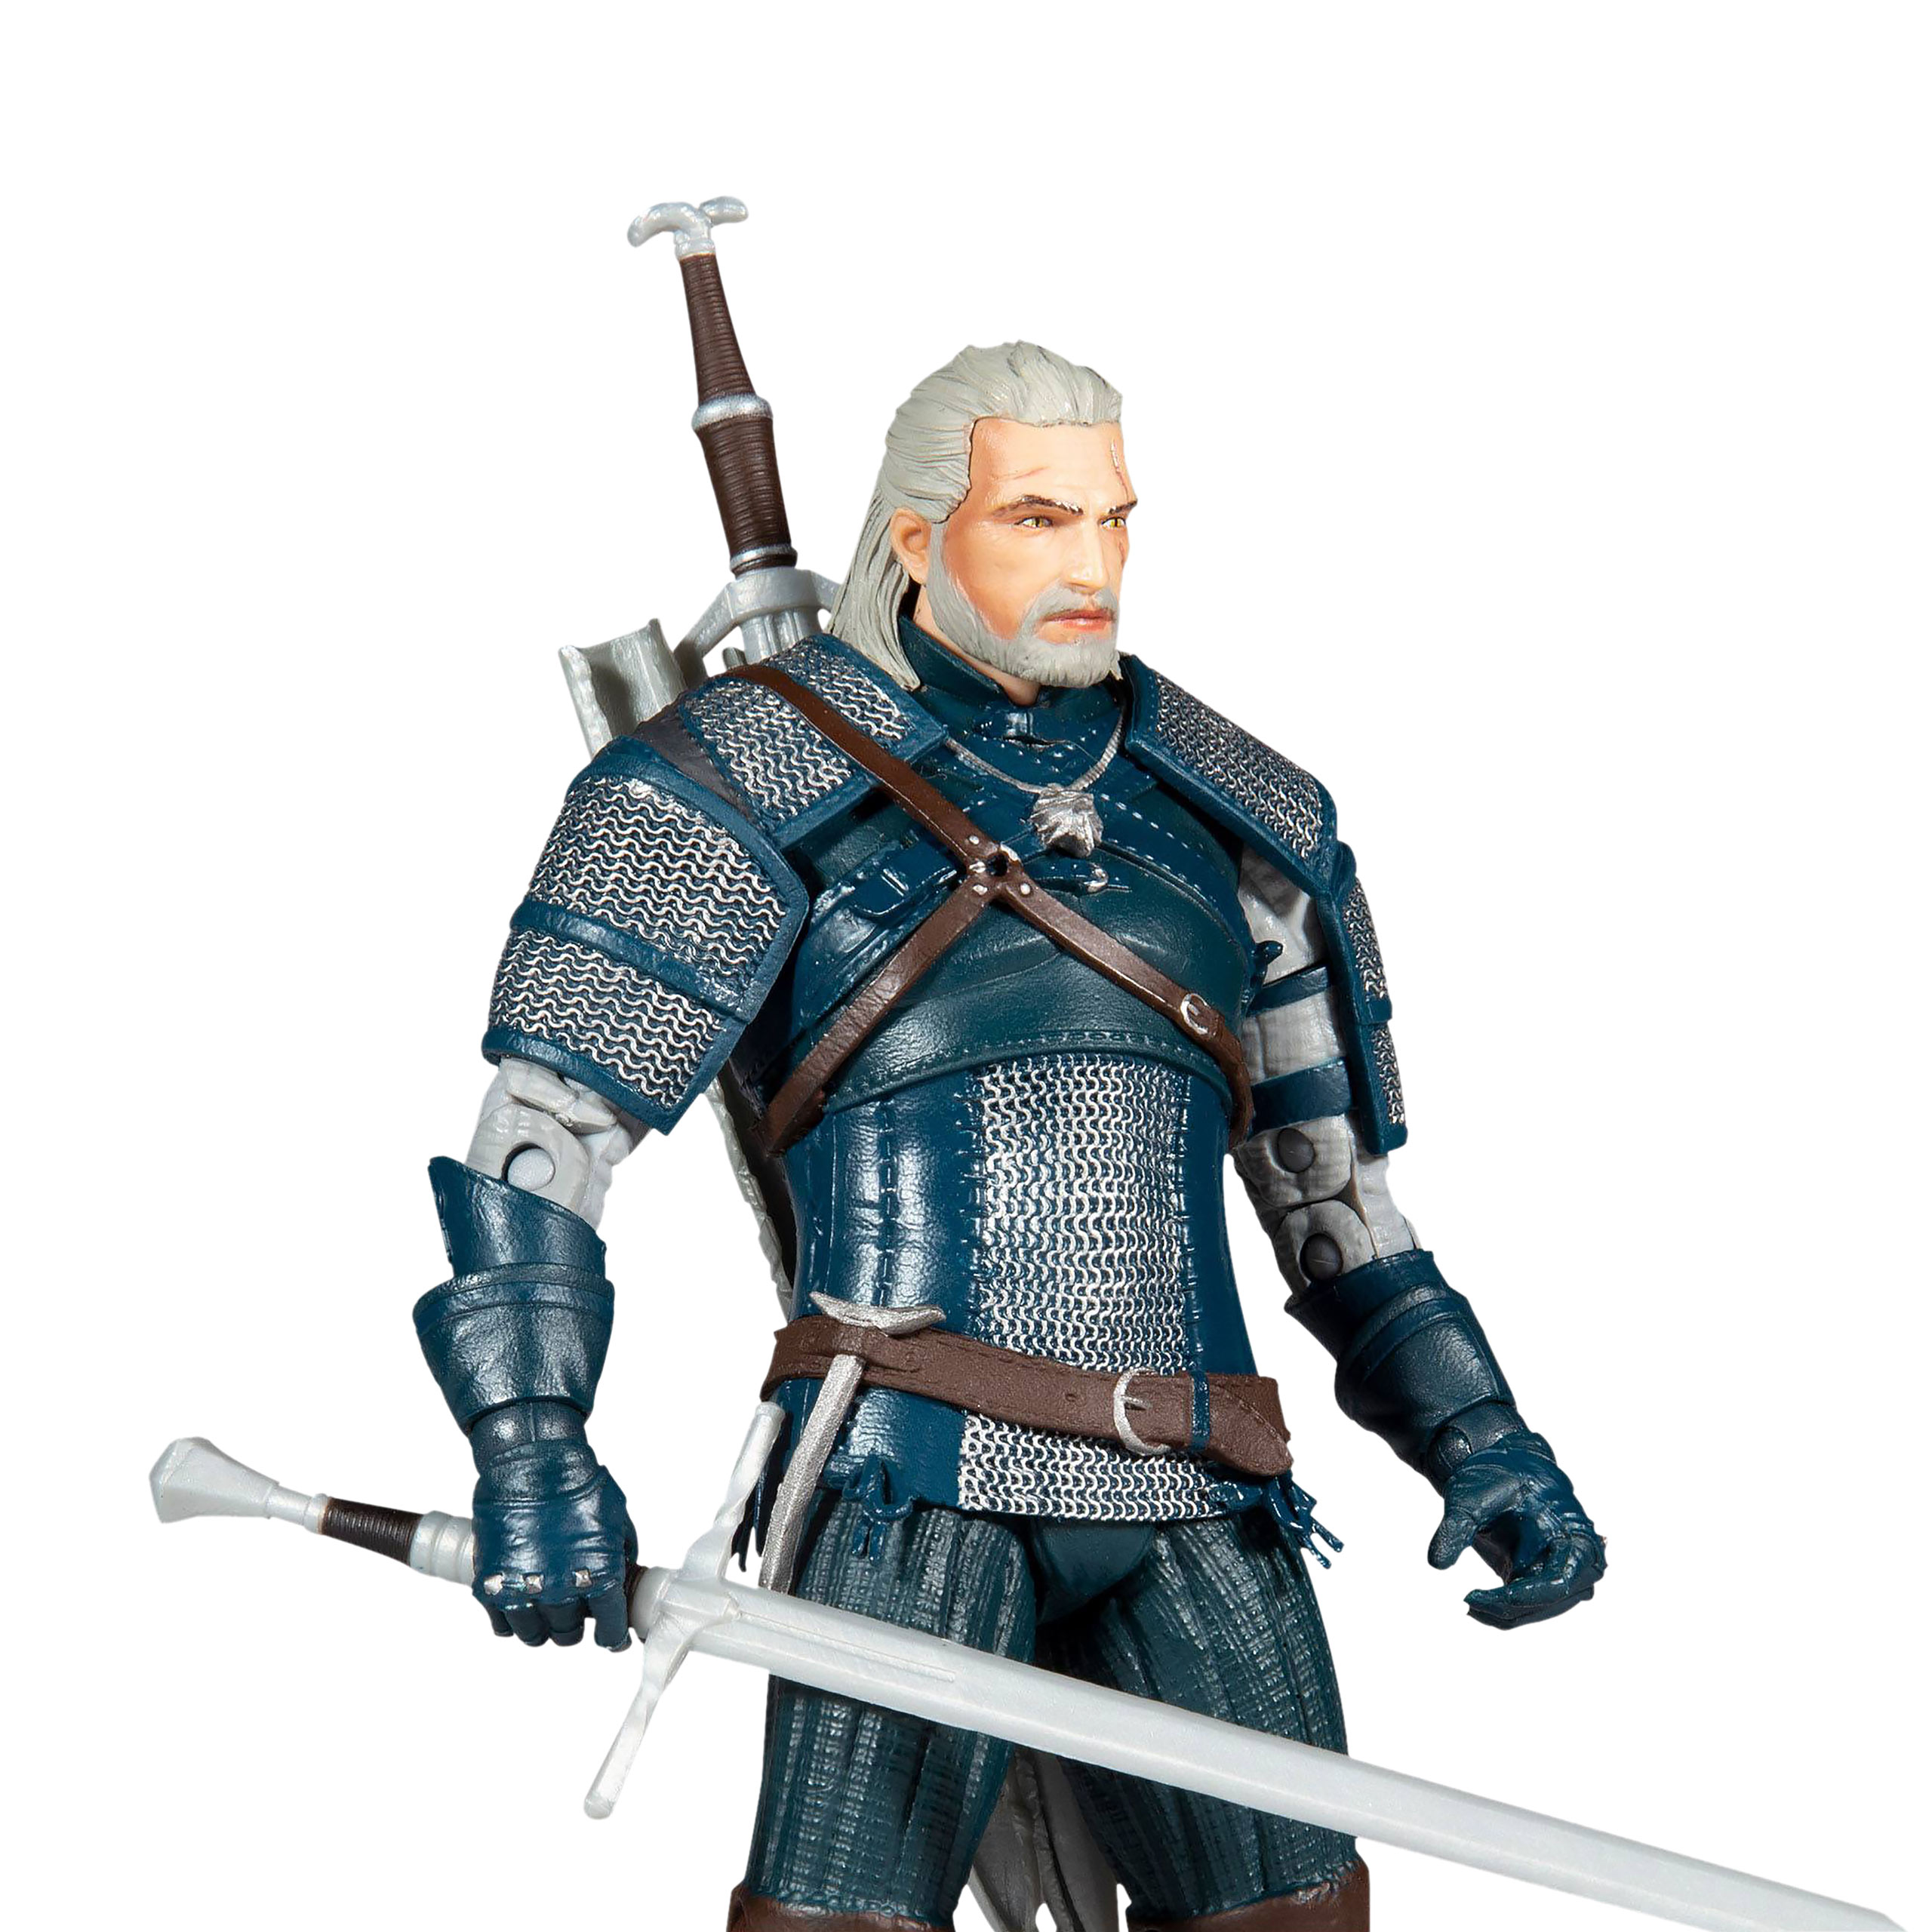 Witcher - Geralt of Riva action figure